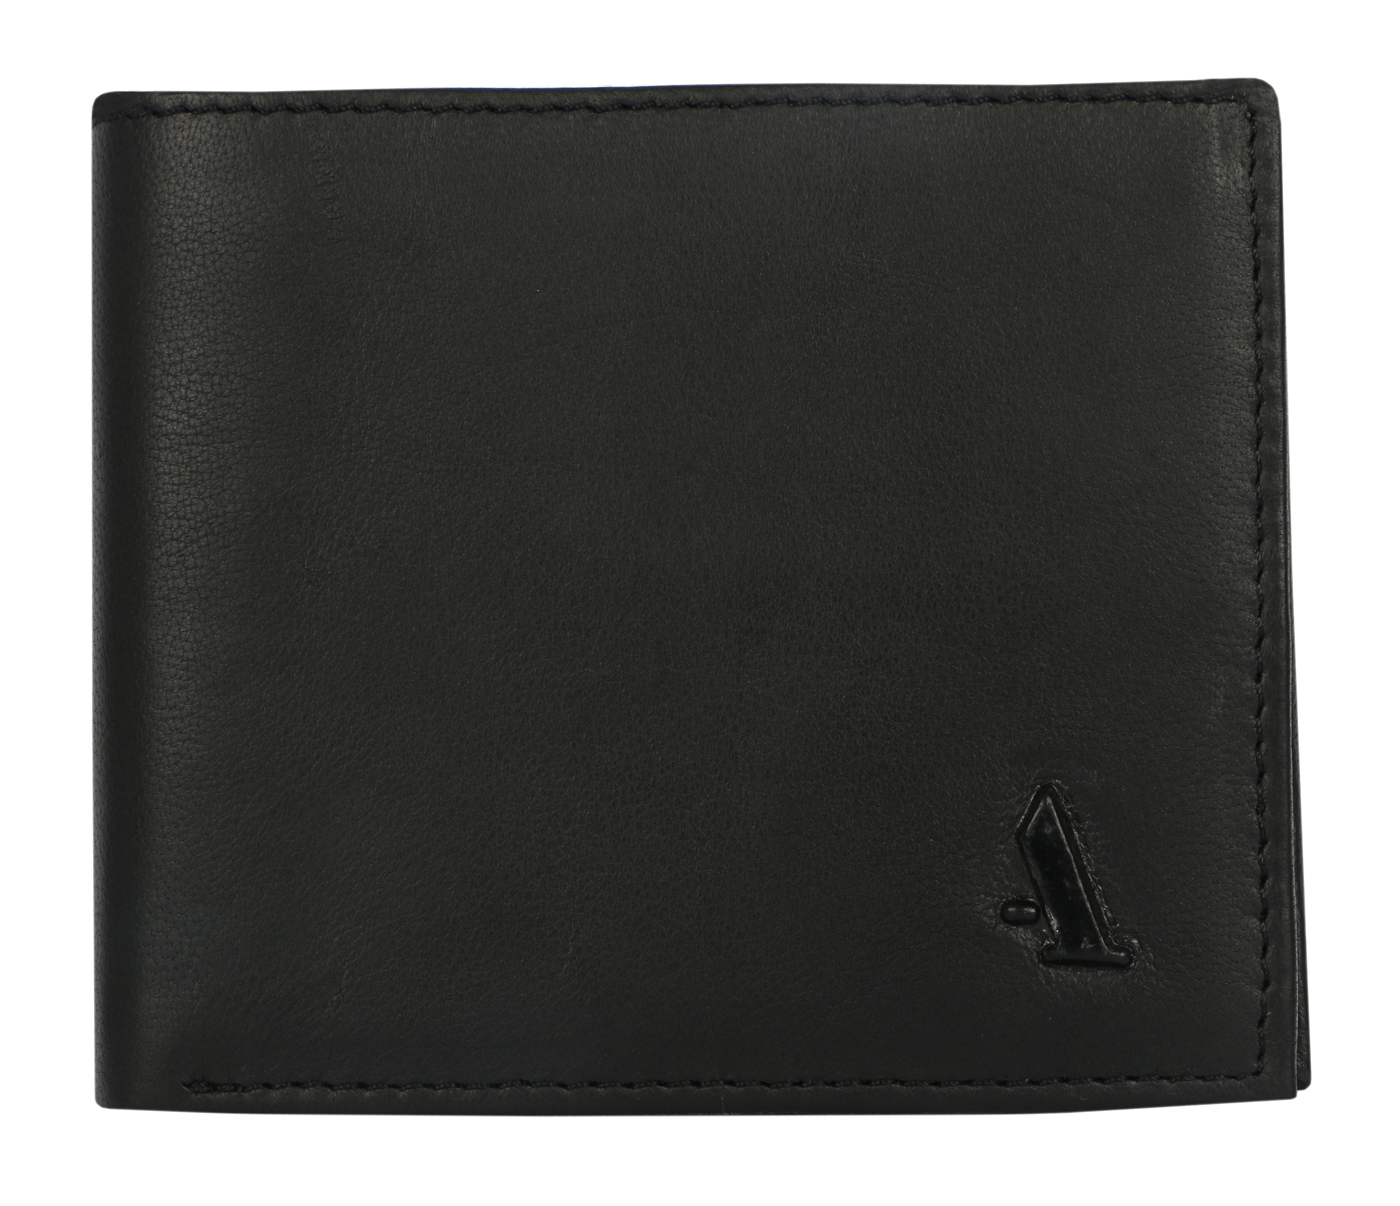 Commono Wallet com-ono Trifold Mini Wallet Wallet Compact TINY SERIES –  GALLERIA Bag&Luggage